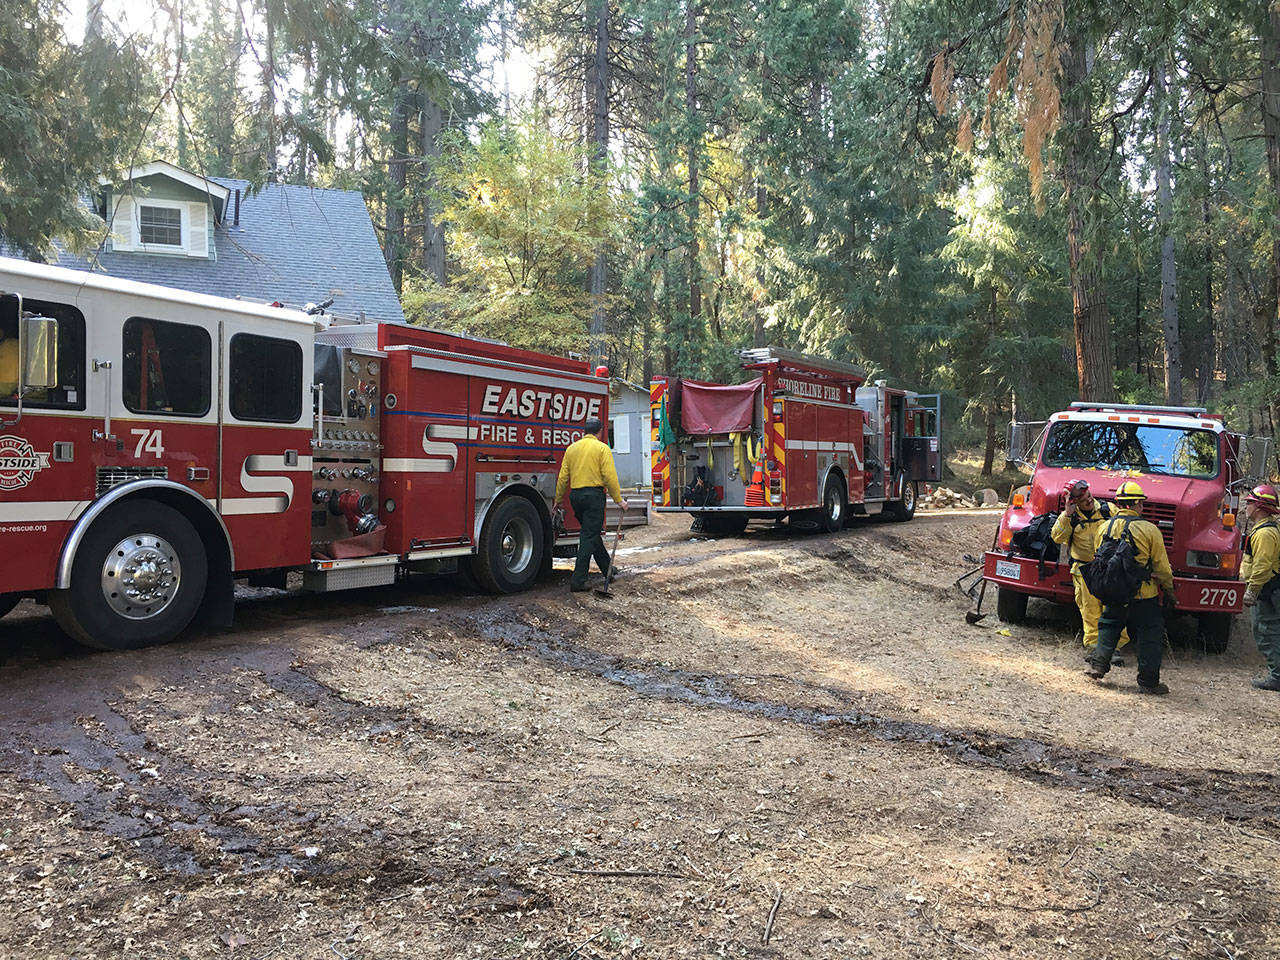 The Eastside strike team consisted of a dozen firefighters from local cities. They assisted with small brush fires and watched over a small community near Malibu as a fire raged on a nearby hillside. Photos courtesy of Jeff Storey and Dave McDaniel